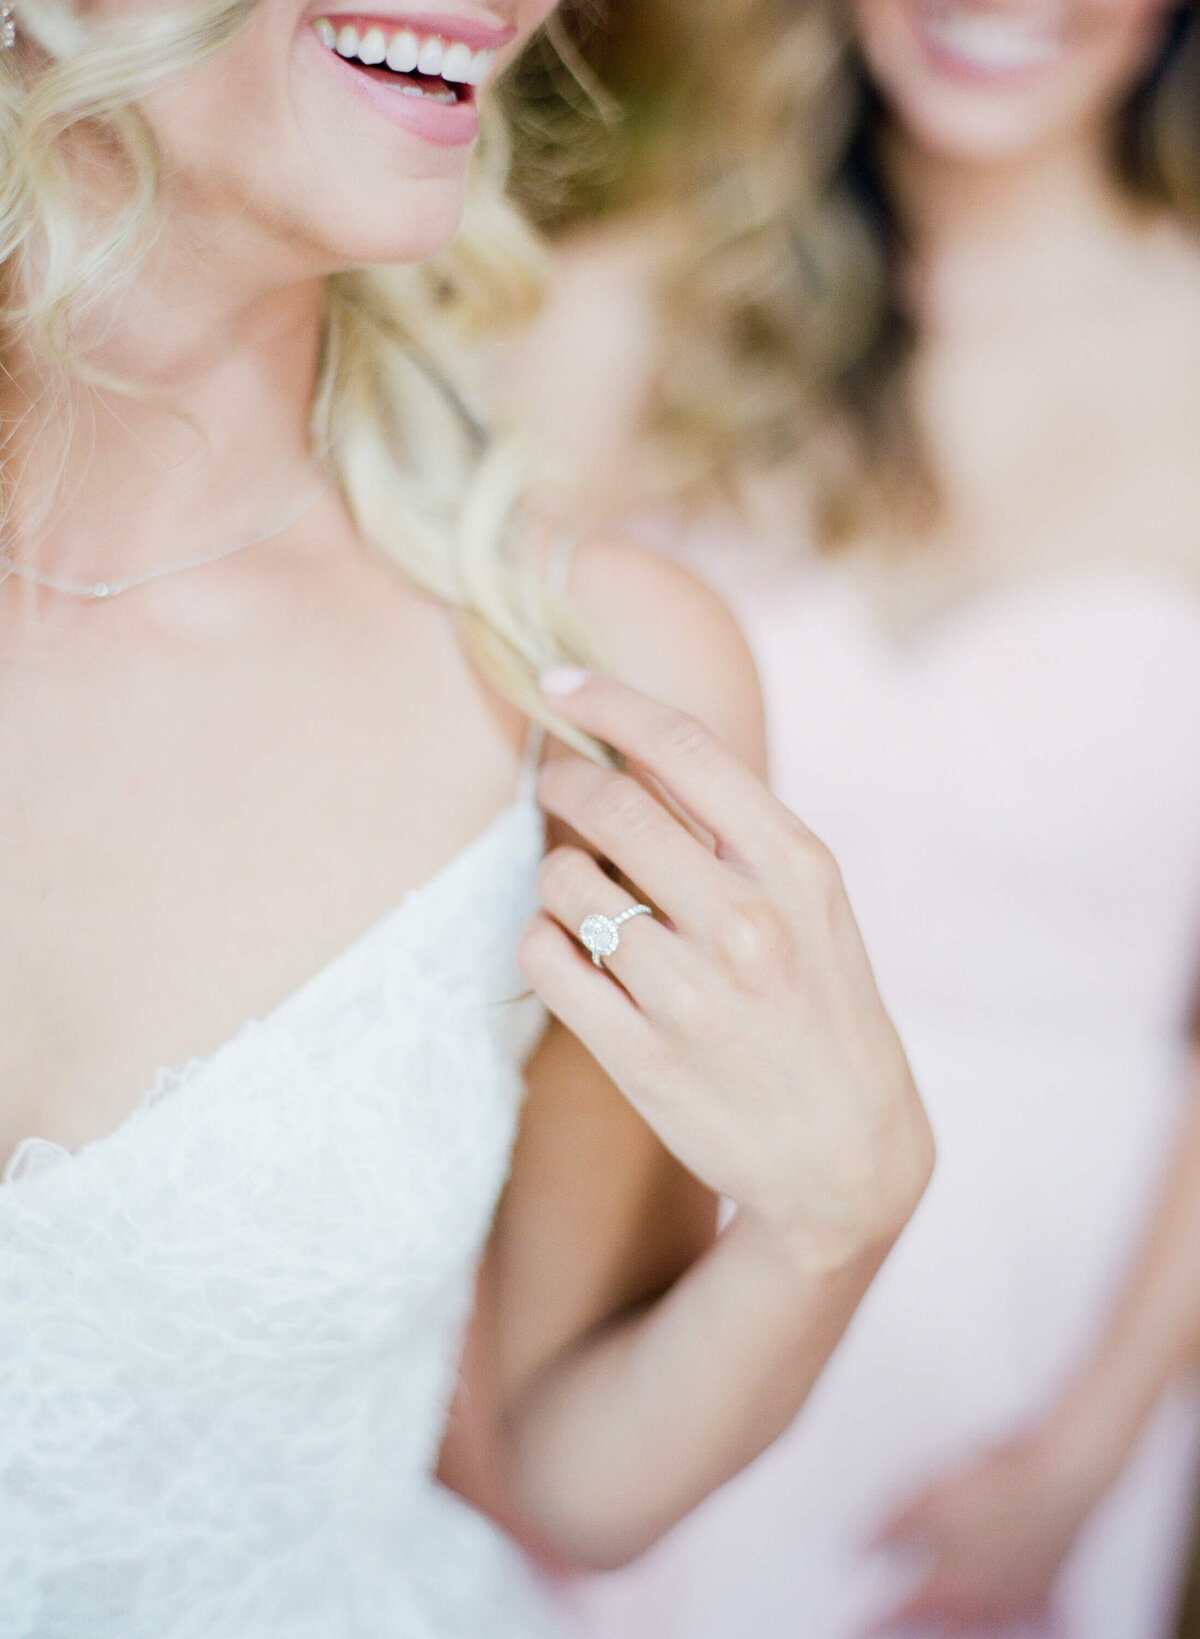 Bride displays her beautiful diamond ring while wearing a sleeveless wedding gown.